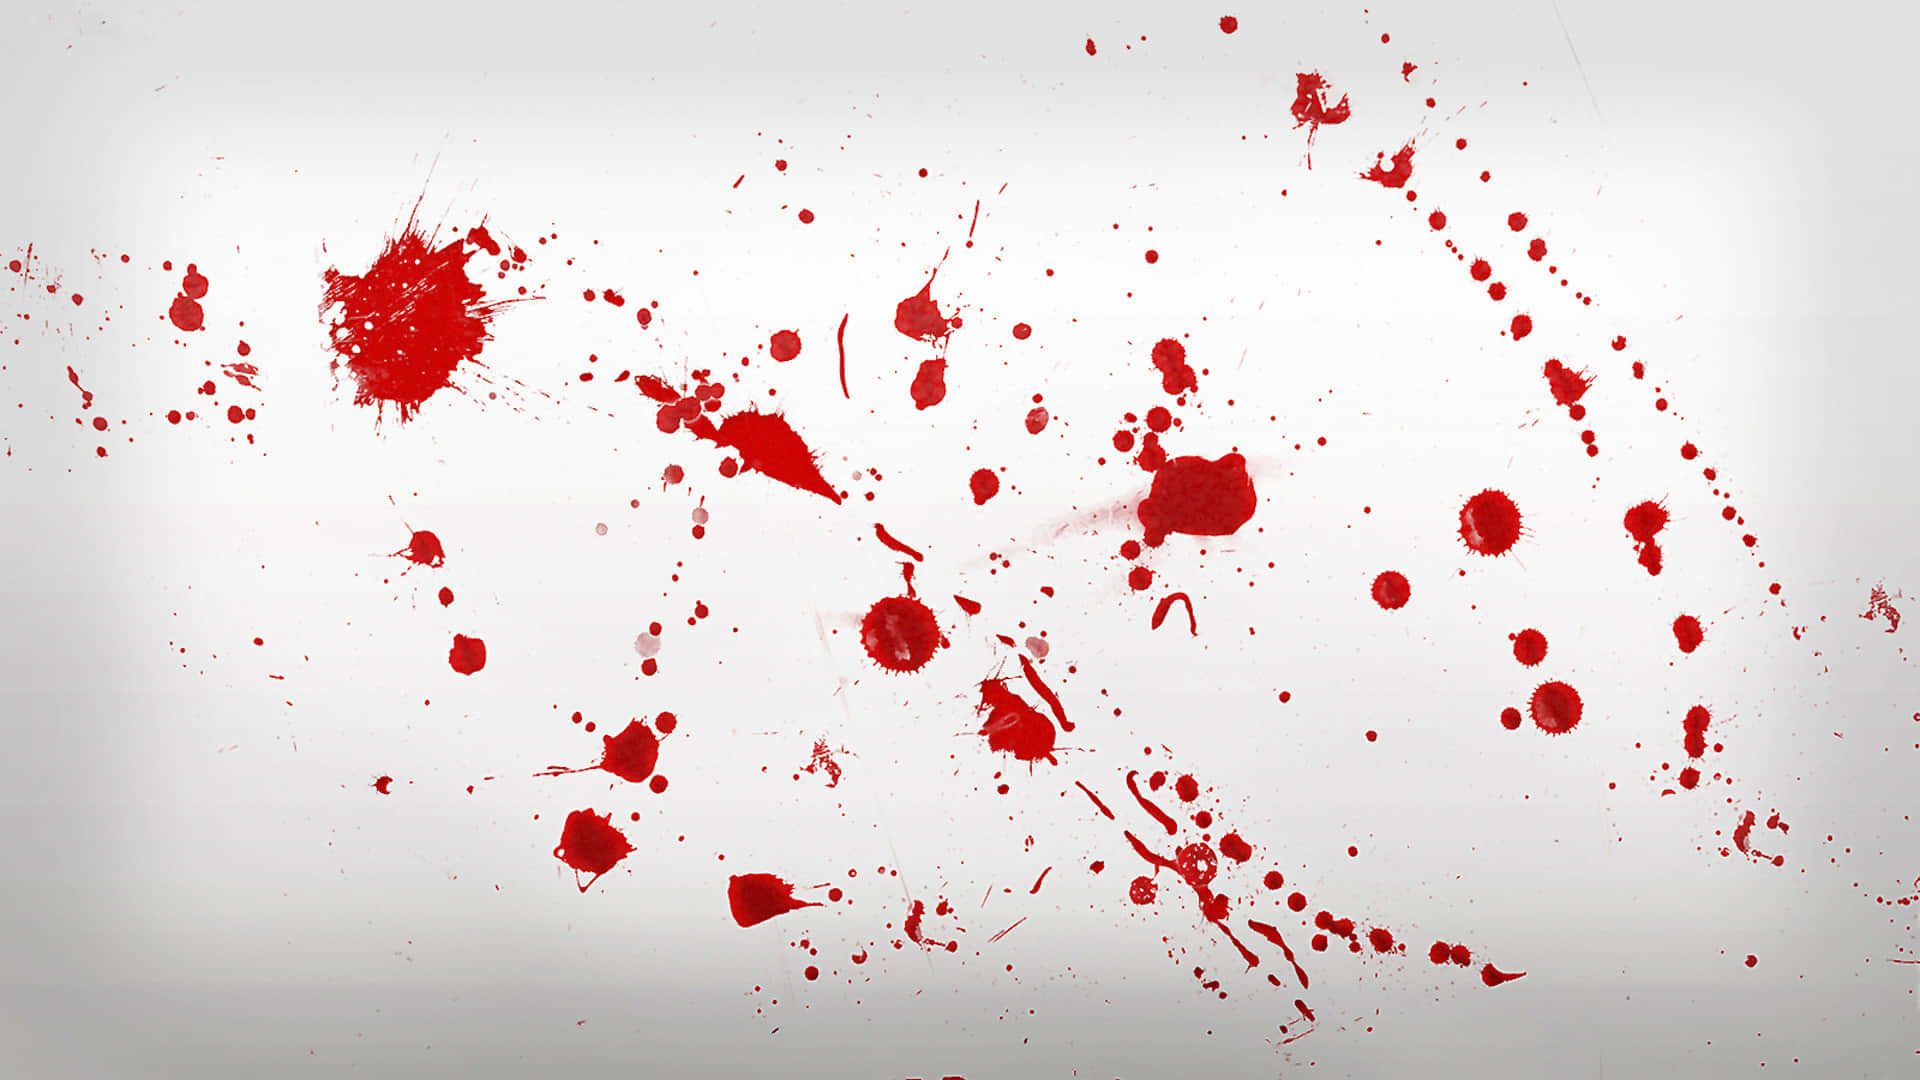 A red and white poster with blood on it - Blood